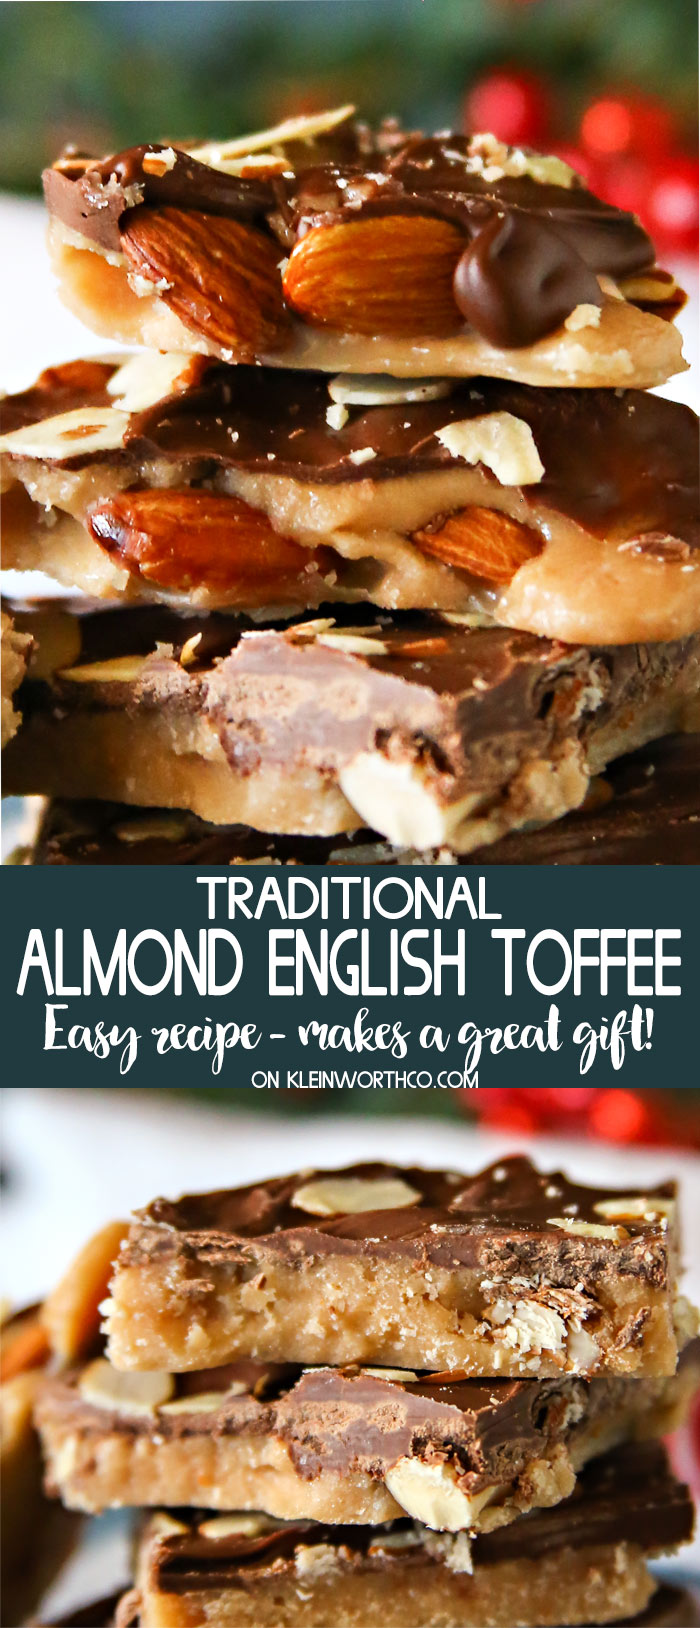 Traditional Almond English Toffee recipe